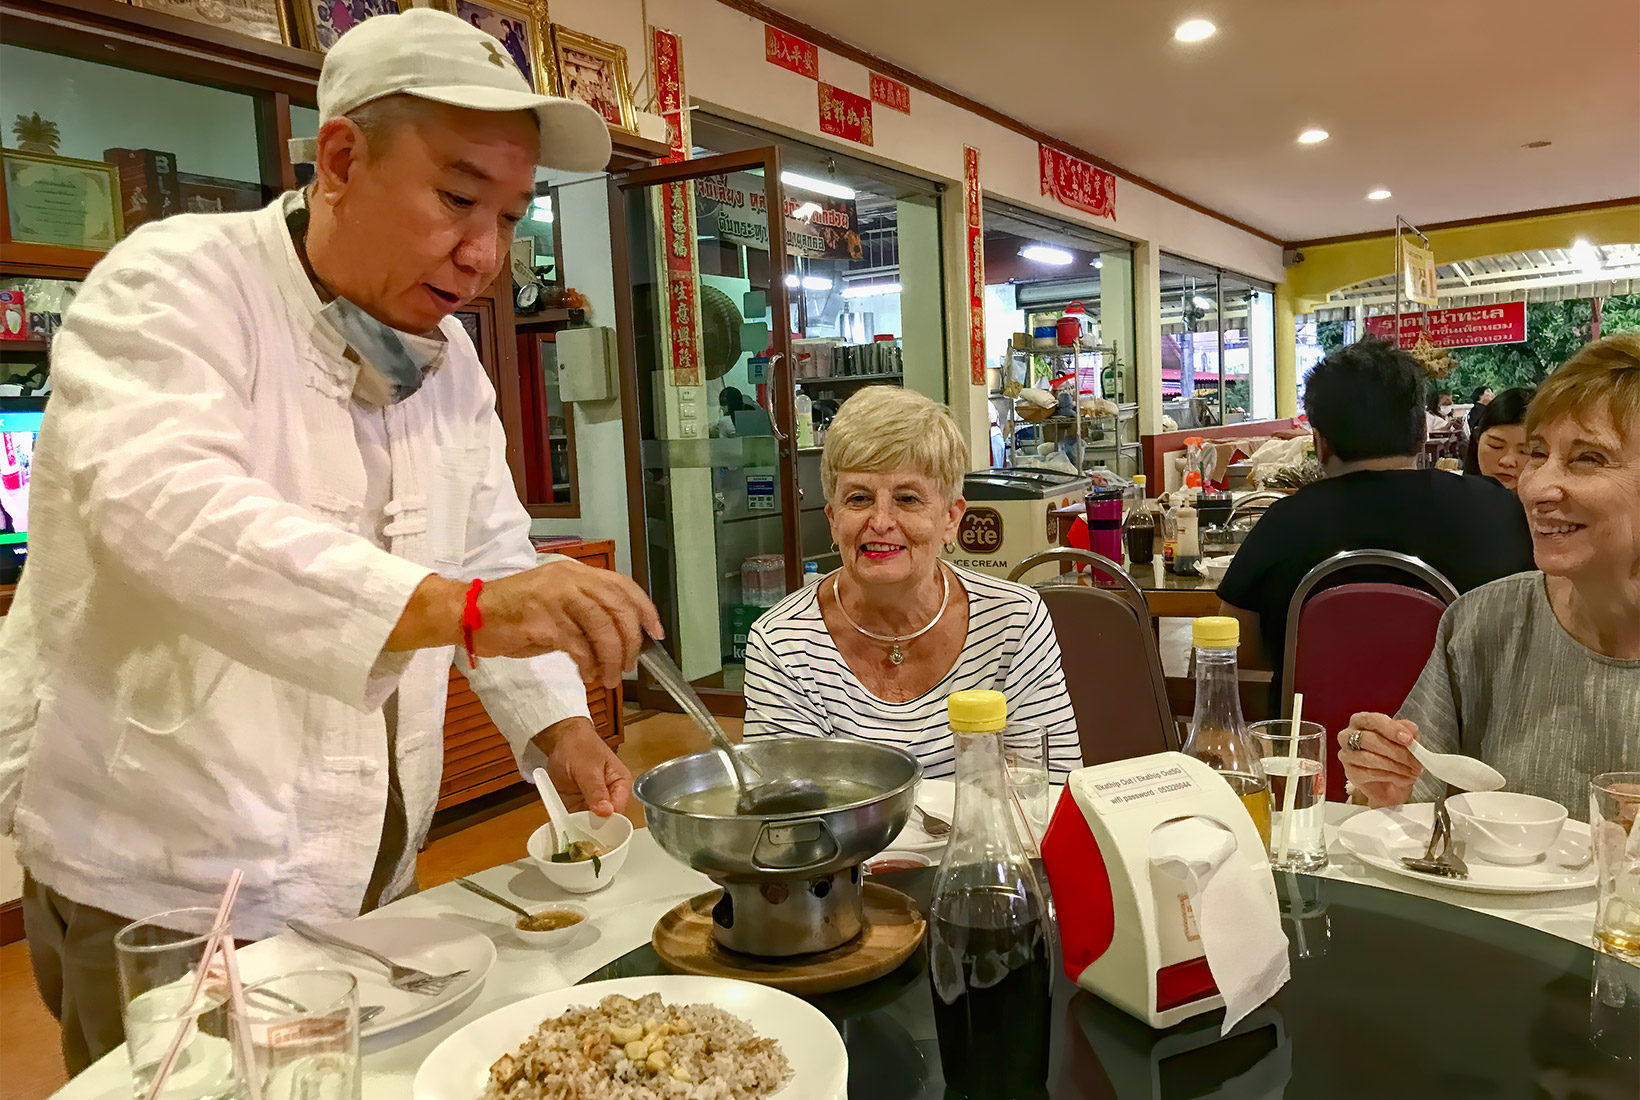 Chumpol Kondee (Pop) dishes up sweet and sour soup for us at Ekathip Chokdee Chinese Restaurant